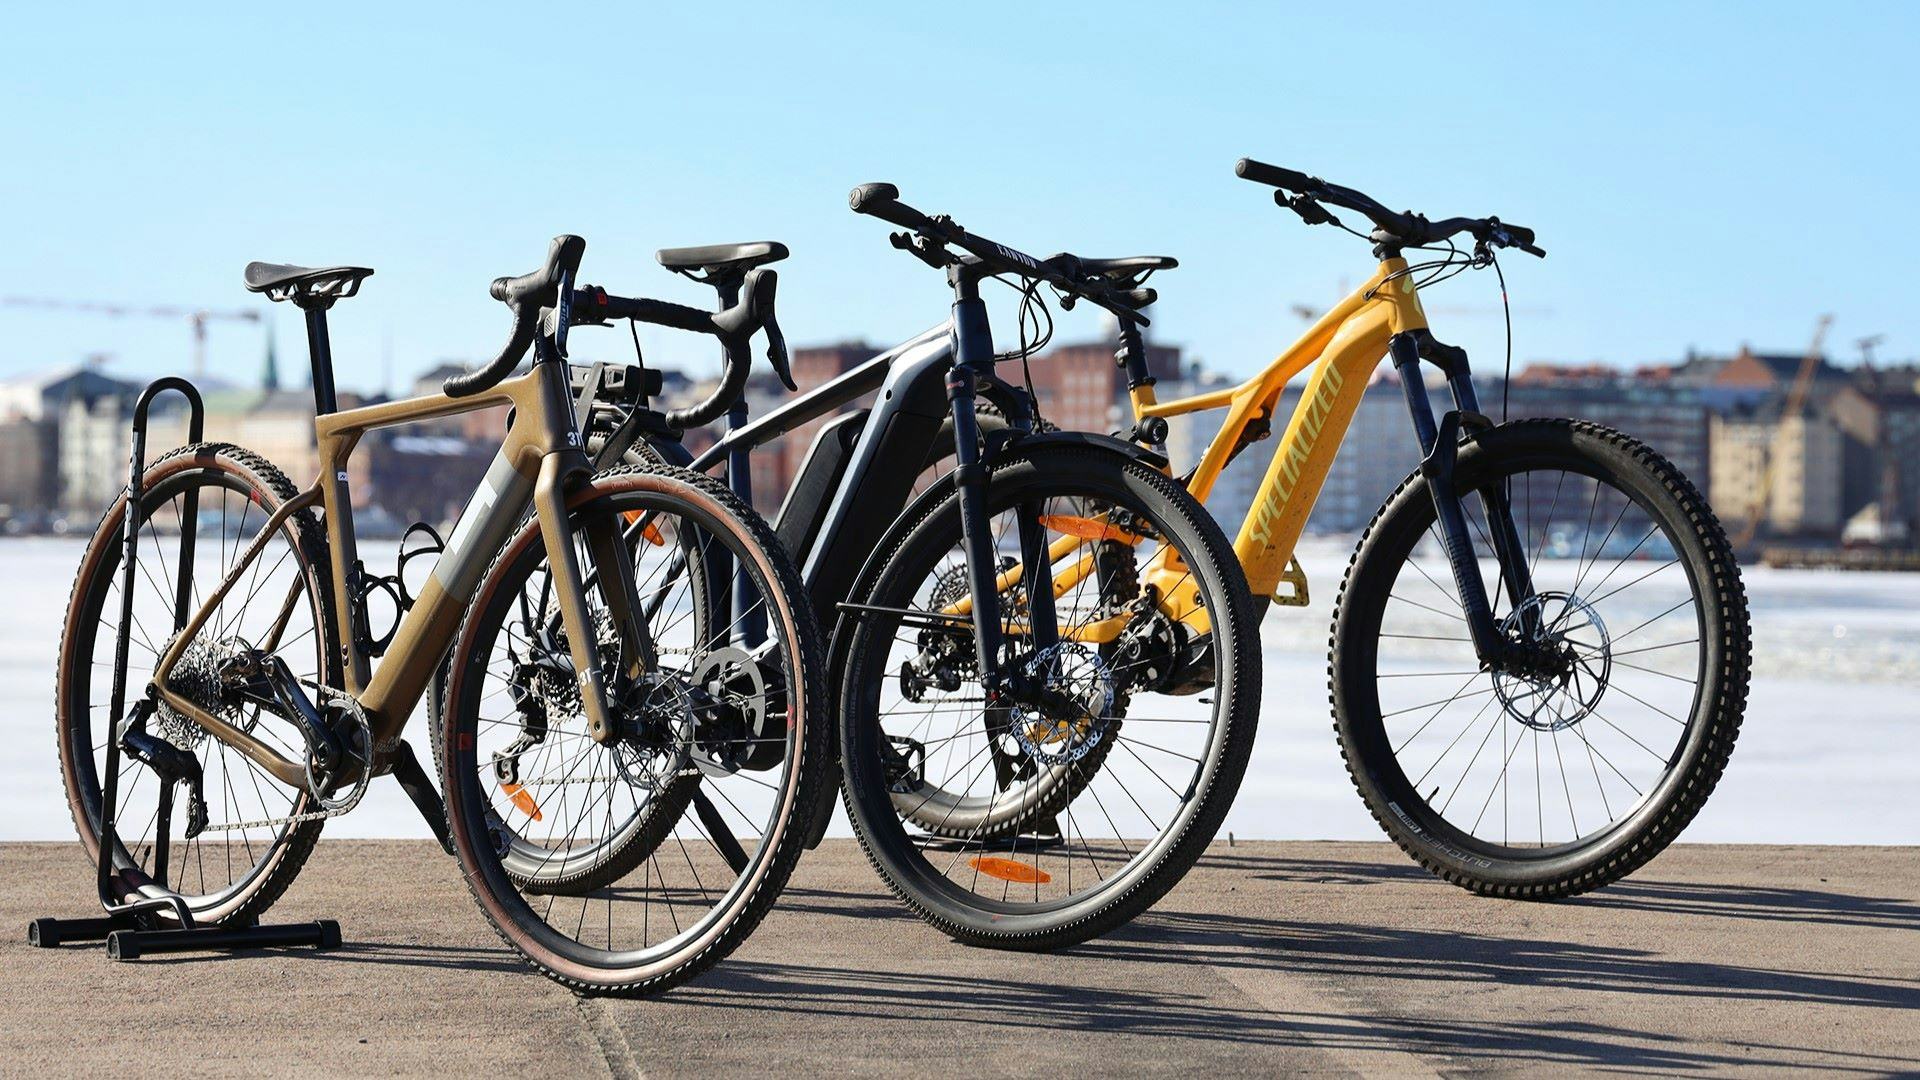 The benefit bike service of Vapaus makes it easy for employees to lease the ‘bike of their dreams’ as a personal benefit through their salary, without having to pay any tax on the first €100 a month. – Photo Vapaus